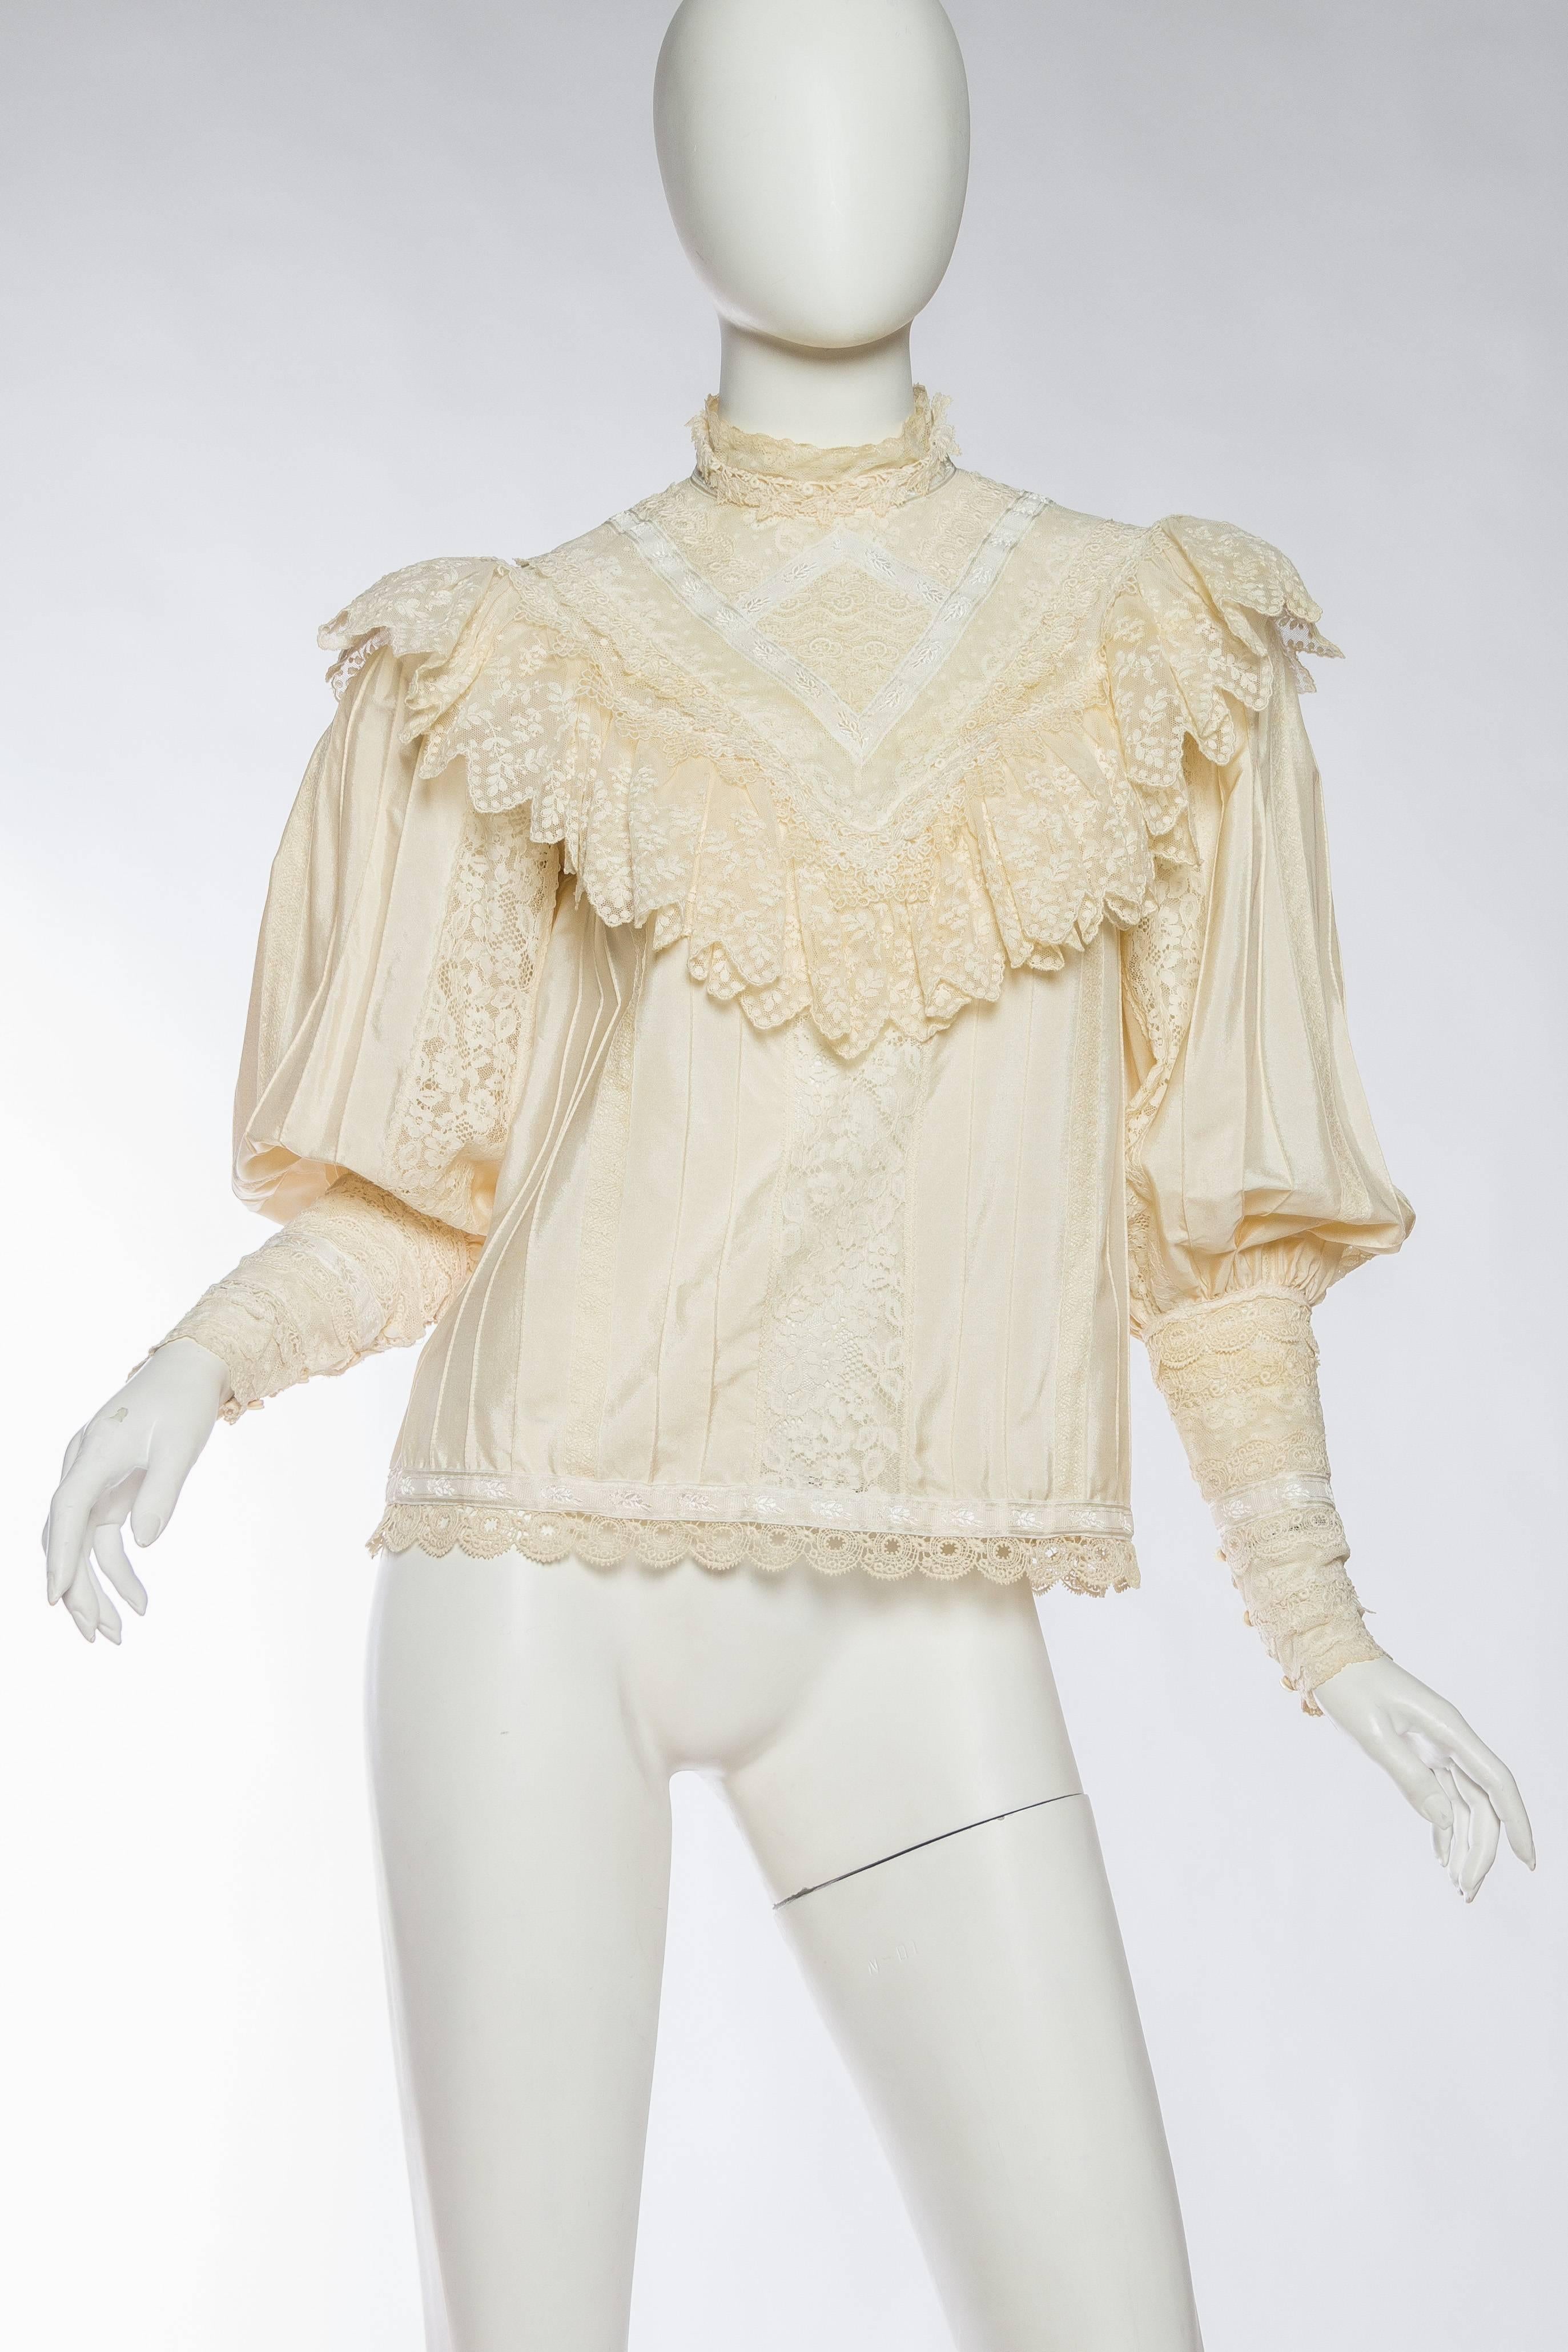 This gorgeous blouse dates in design and manufacture from the late 1970s to early 1980s however what makes it so beautiful is that it is constructed from actual antique lace. 